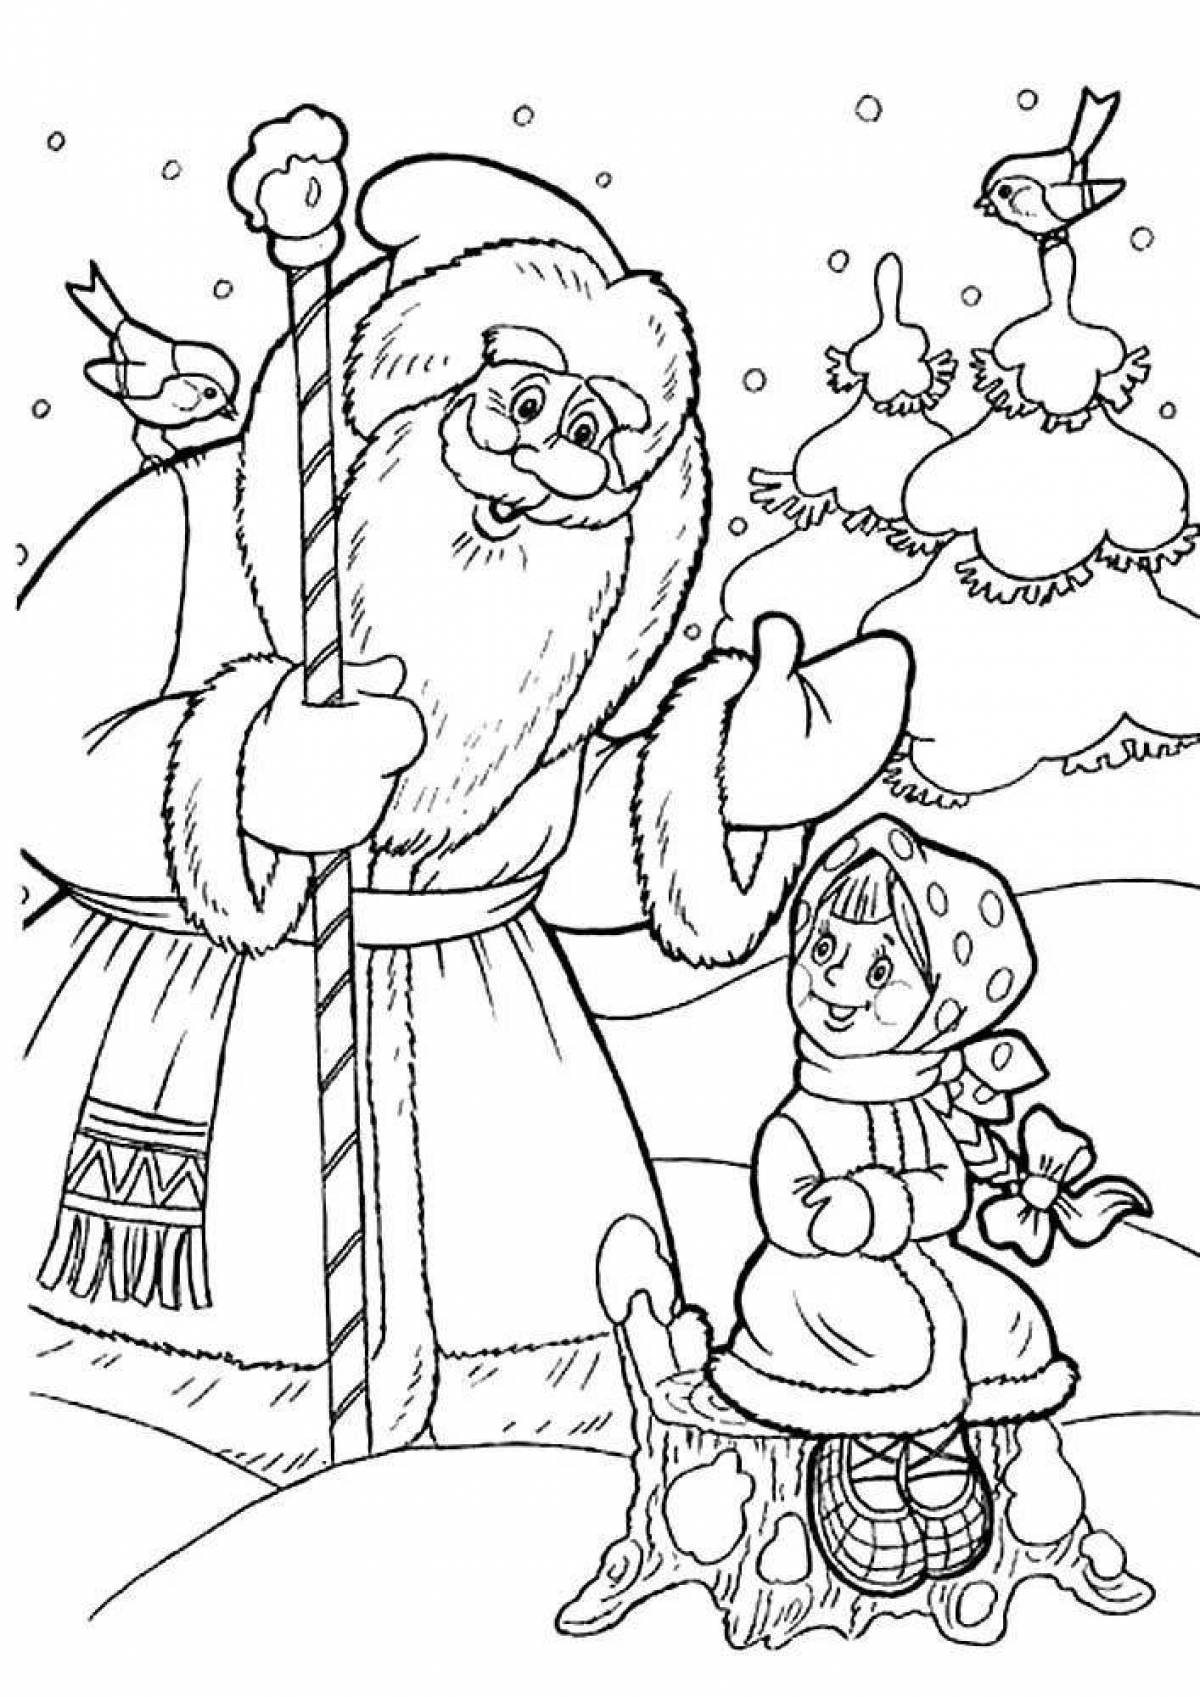 Animated santa claus coloring book for kids 2-3 years old